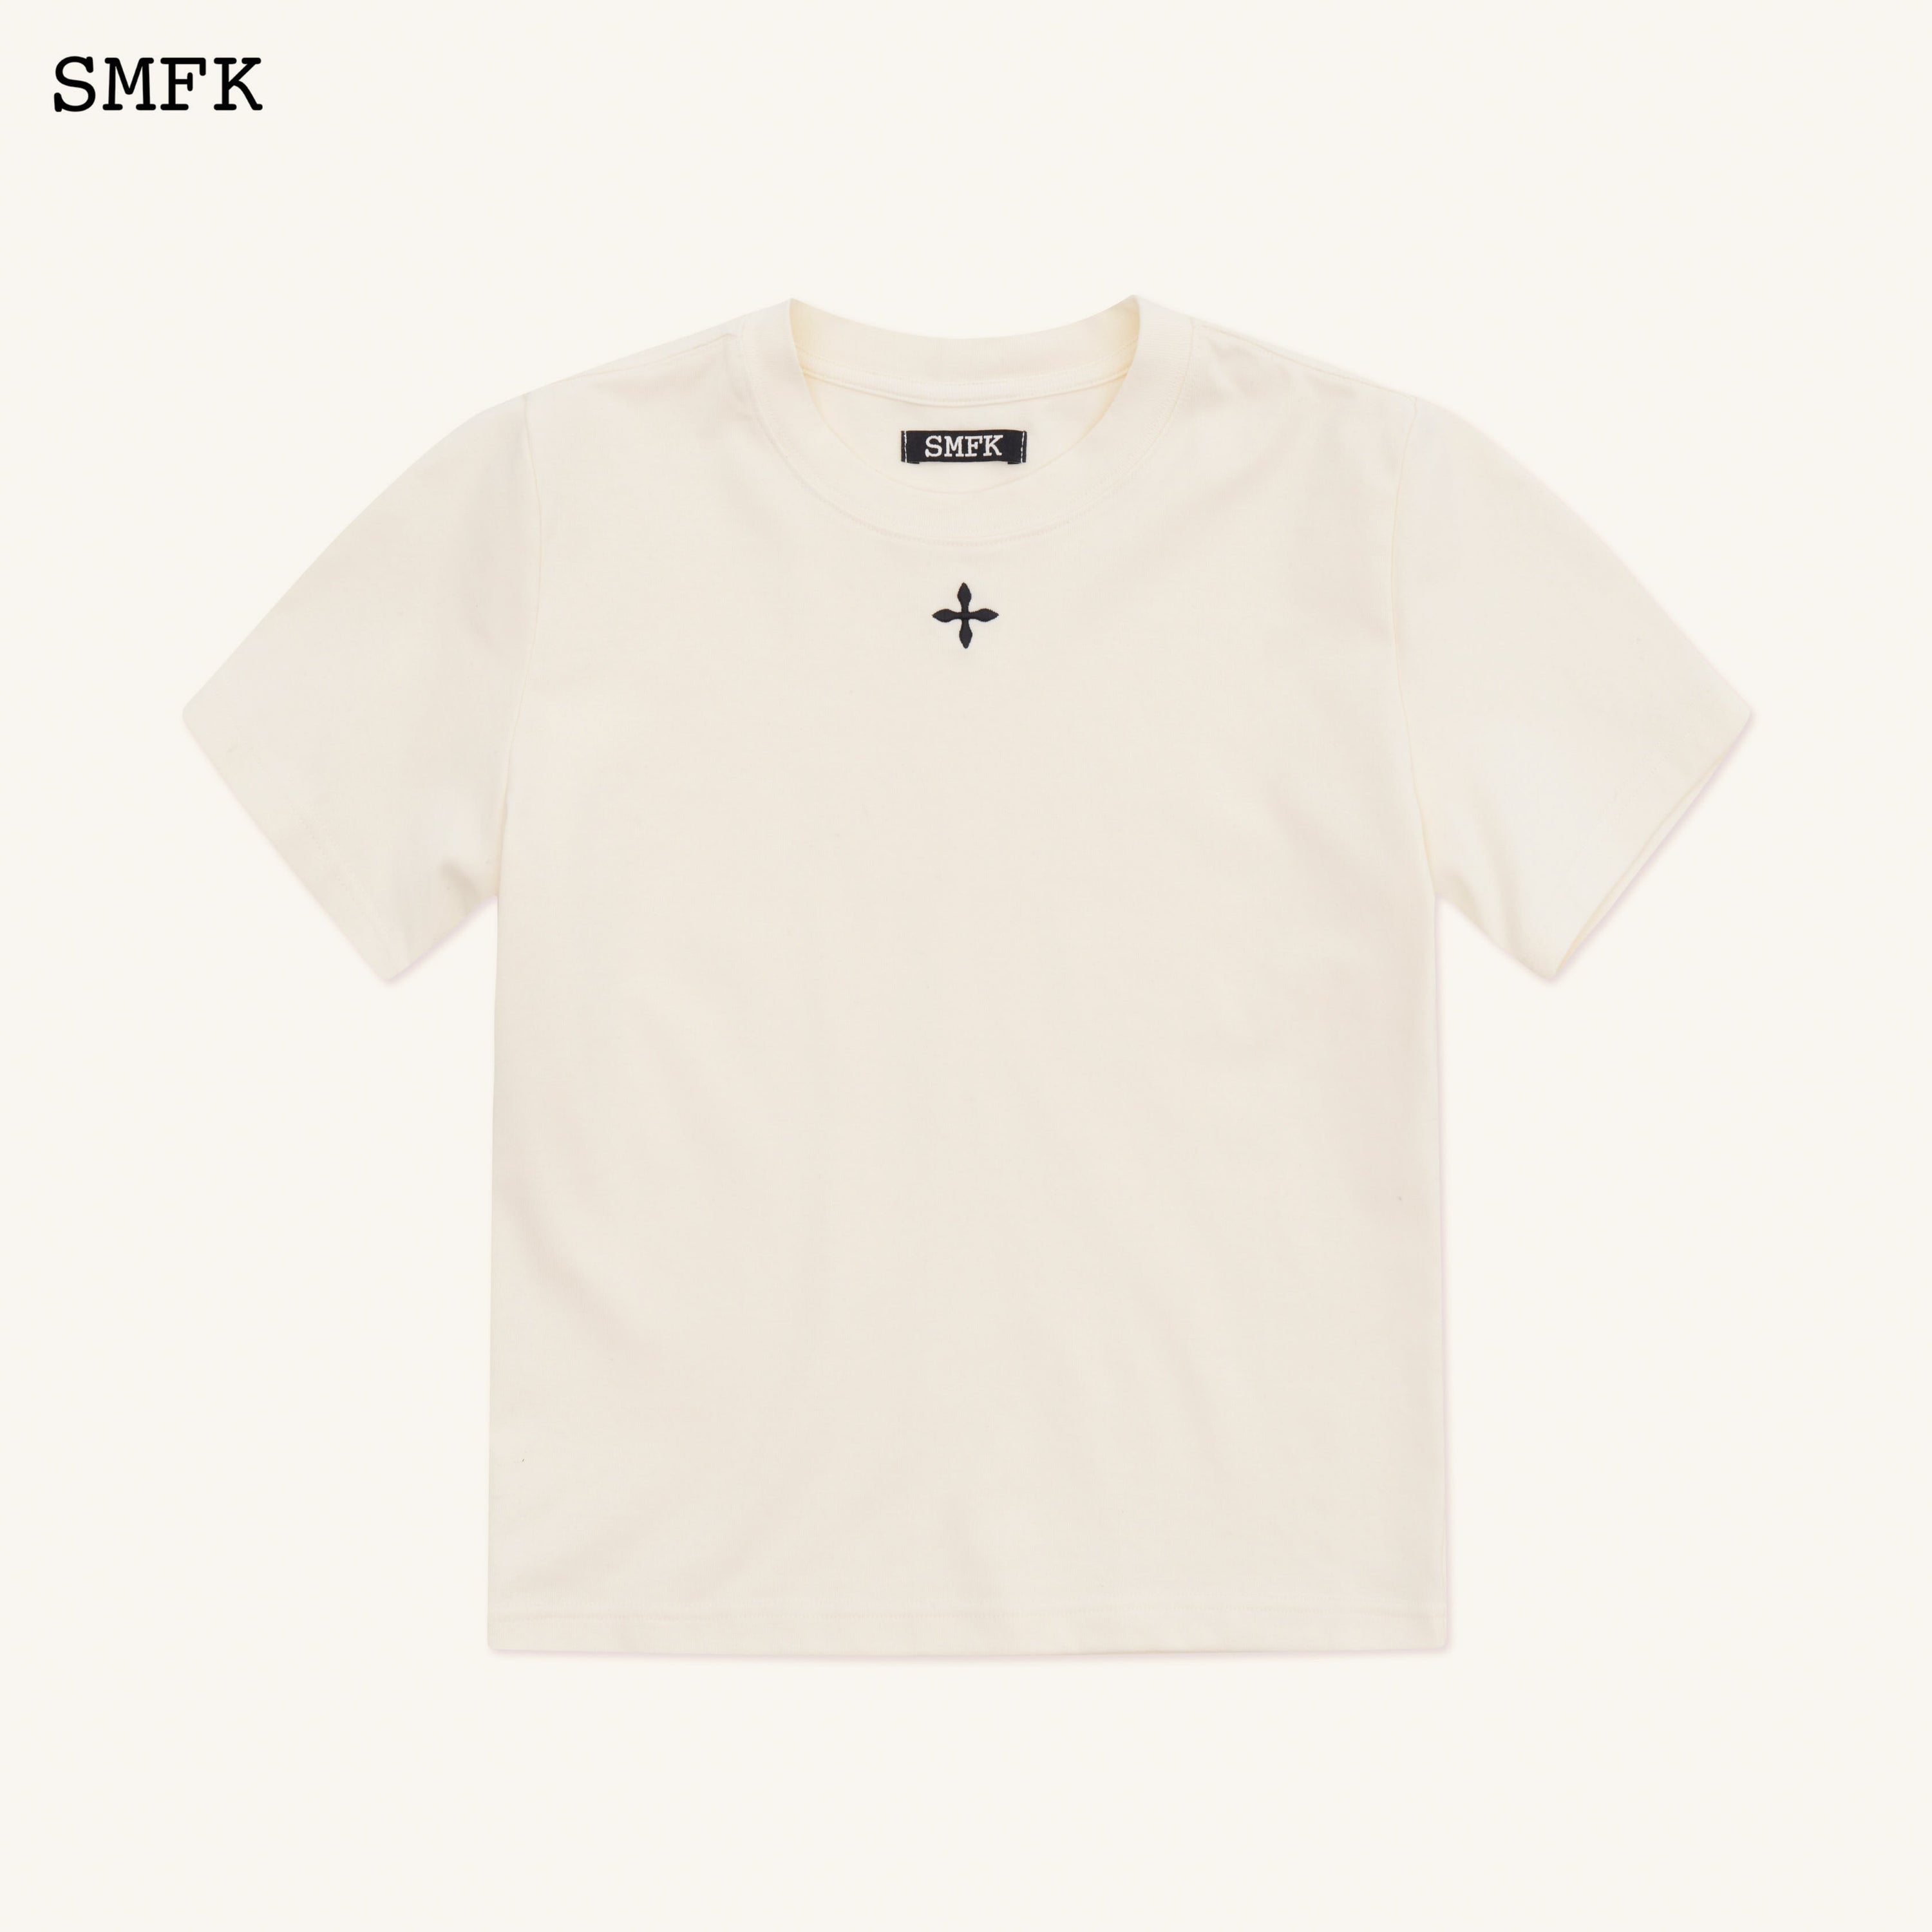 Compass Hug Slim-Fit Tee In White - SMFK Official